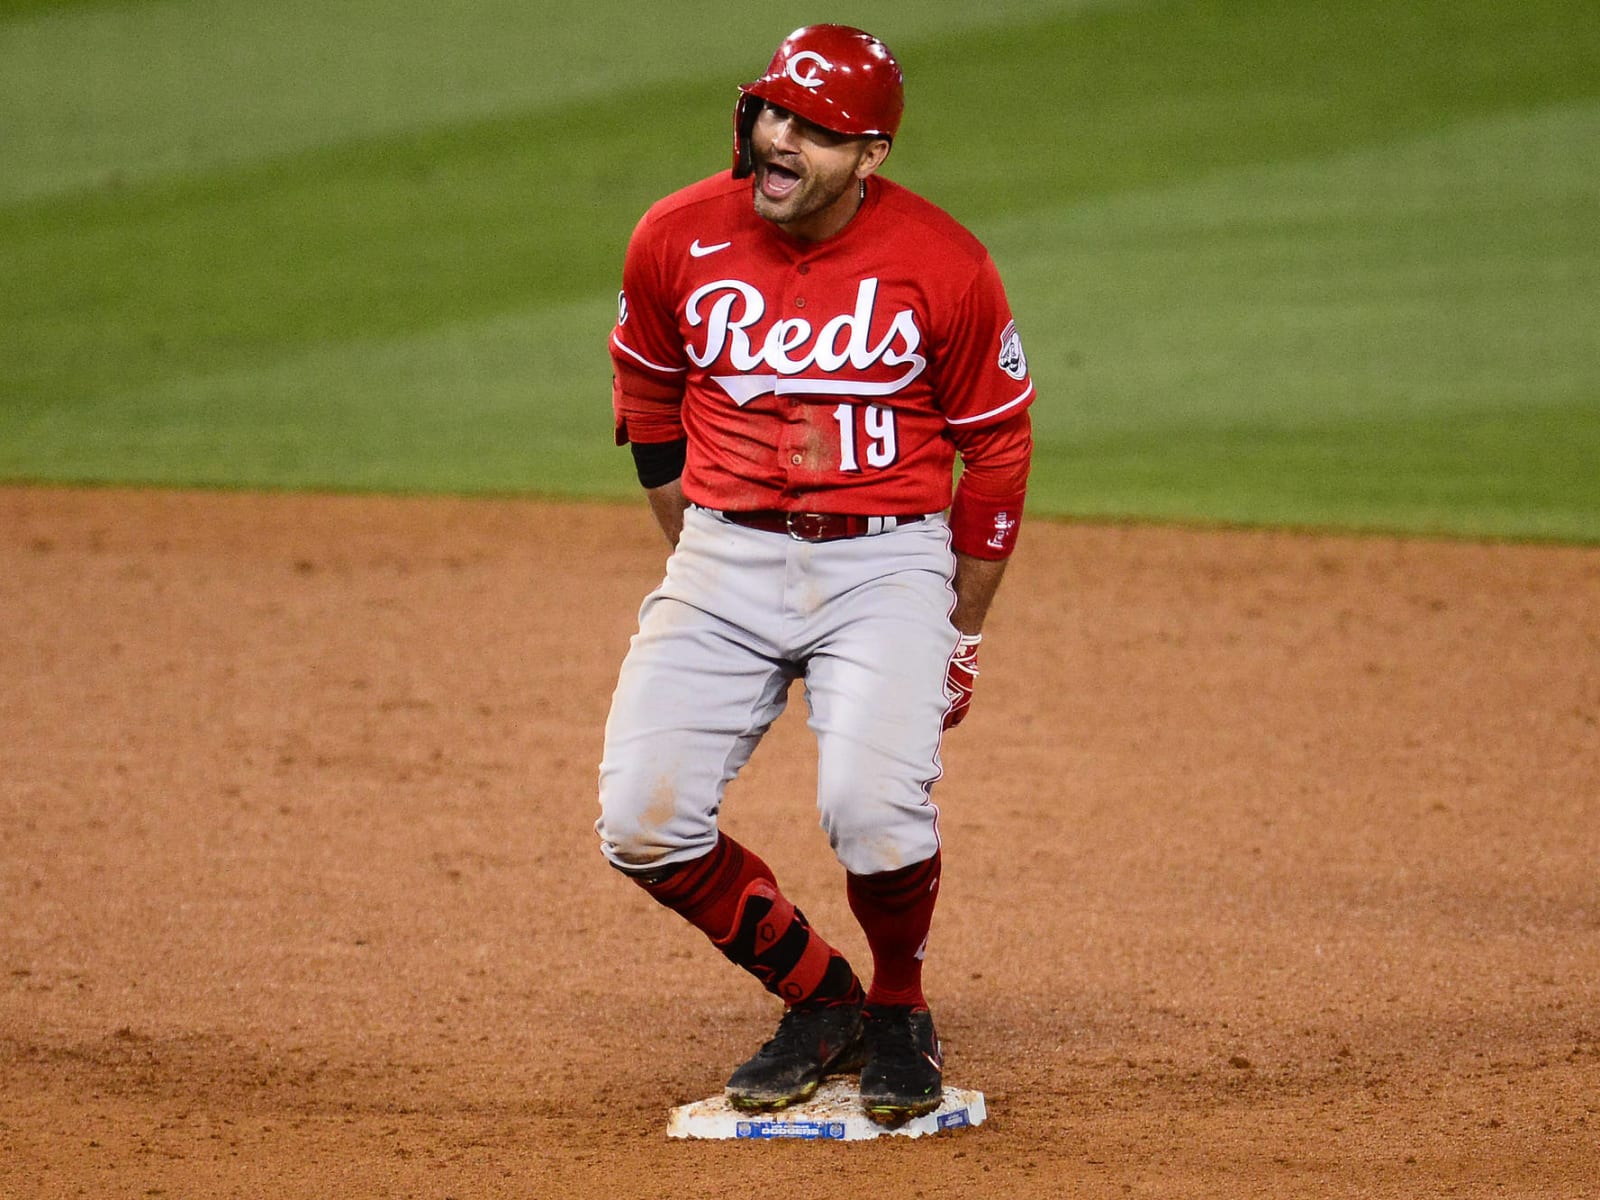 Joey Votto goes off on Reds' sweep of Cardinals in St. Louis